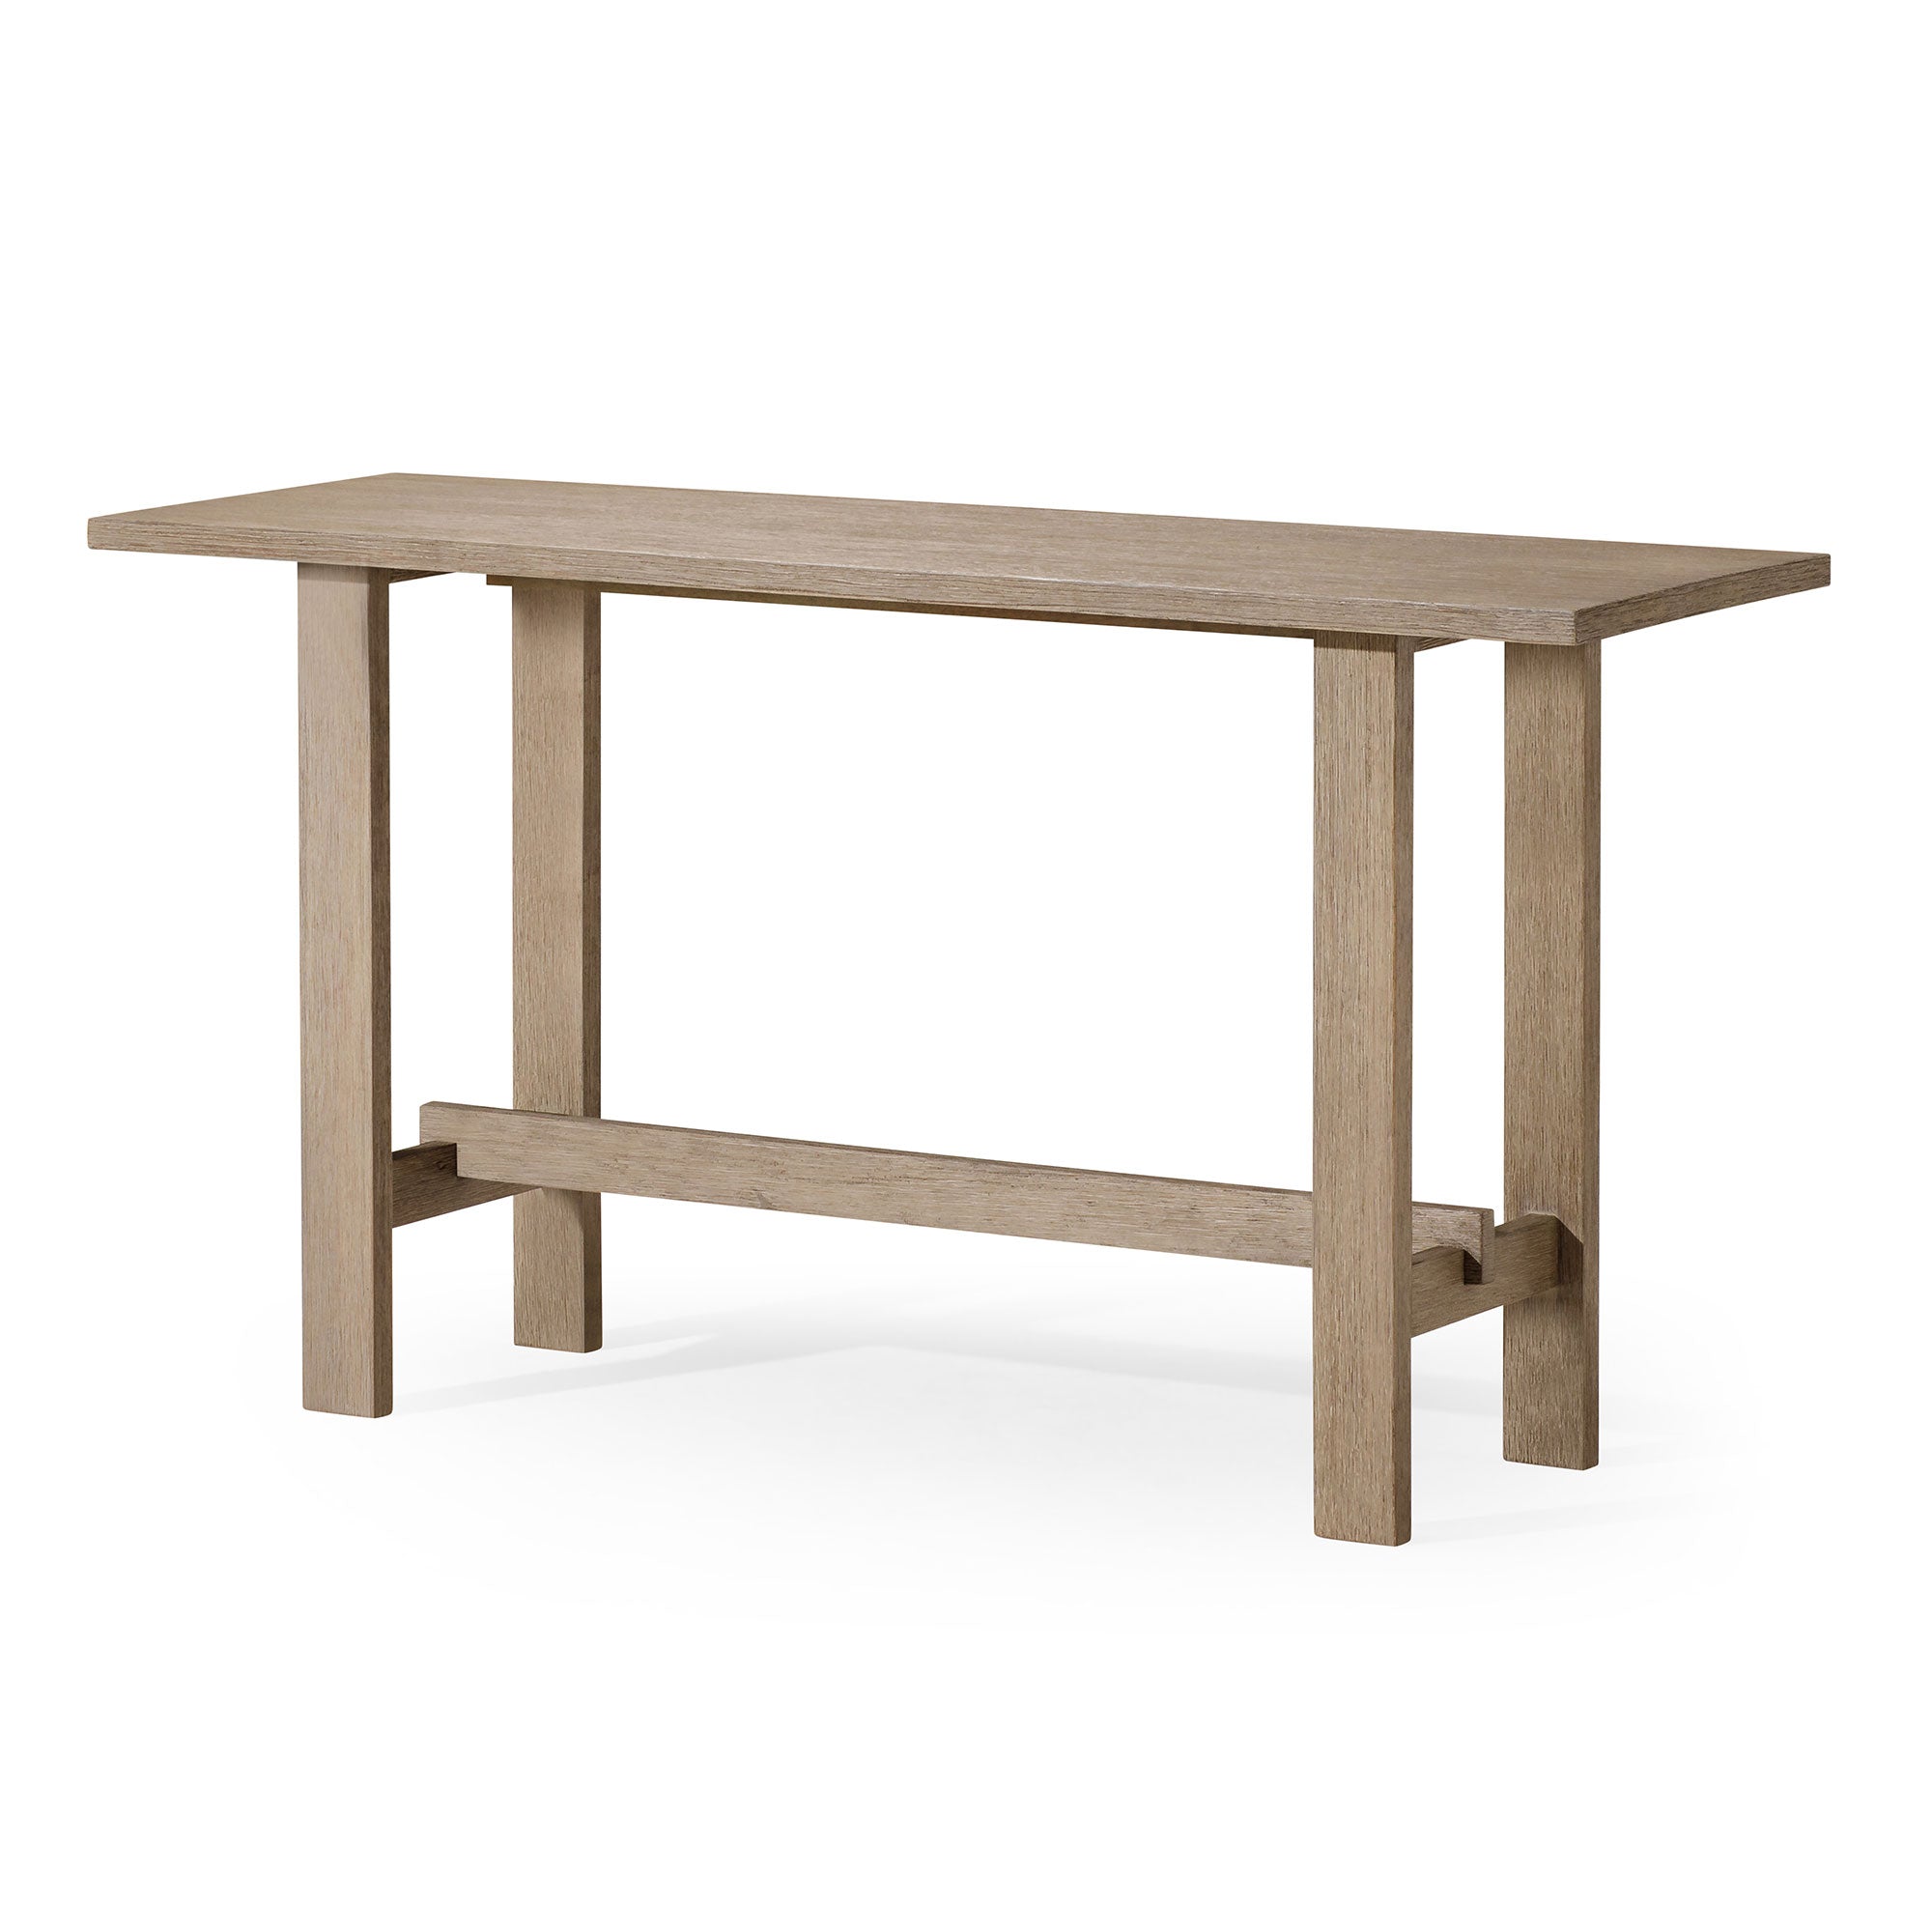 Hera Modern Wooden Console Table in Weathered Grey Finish